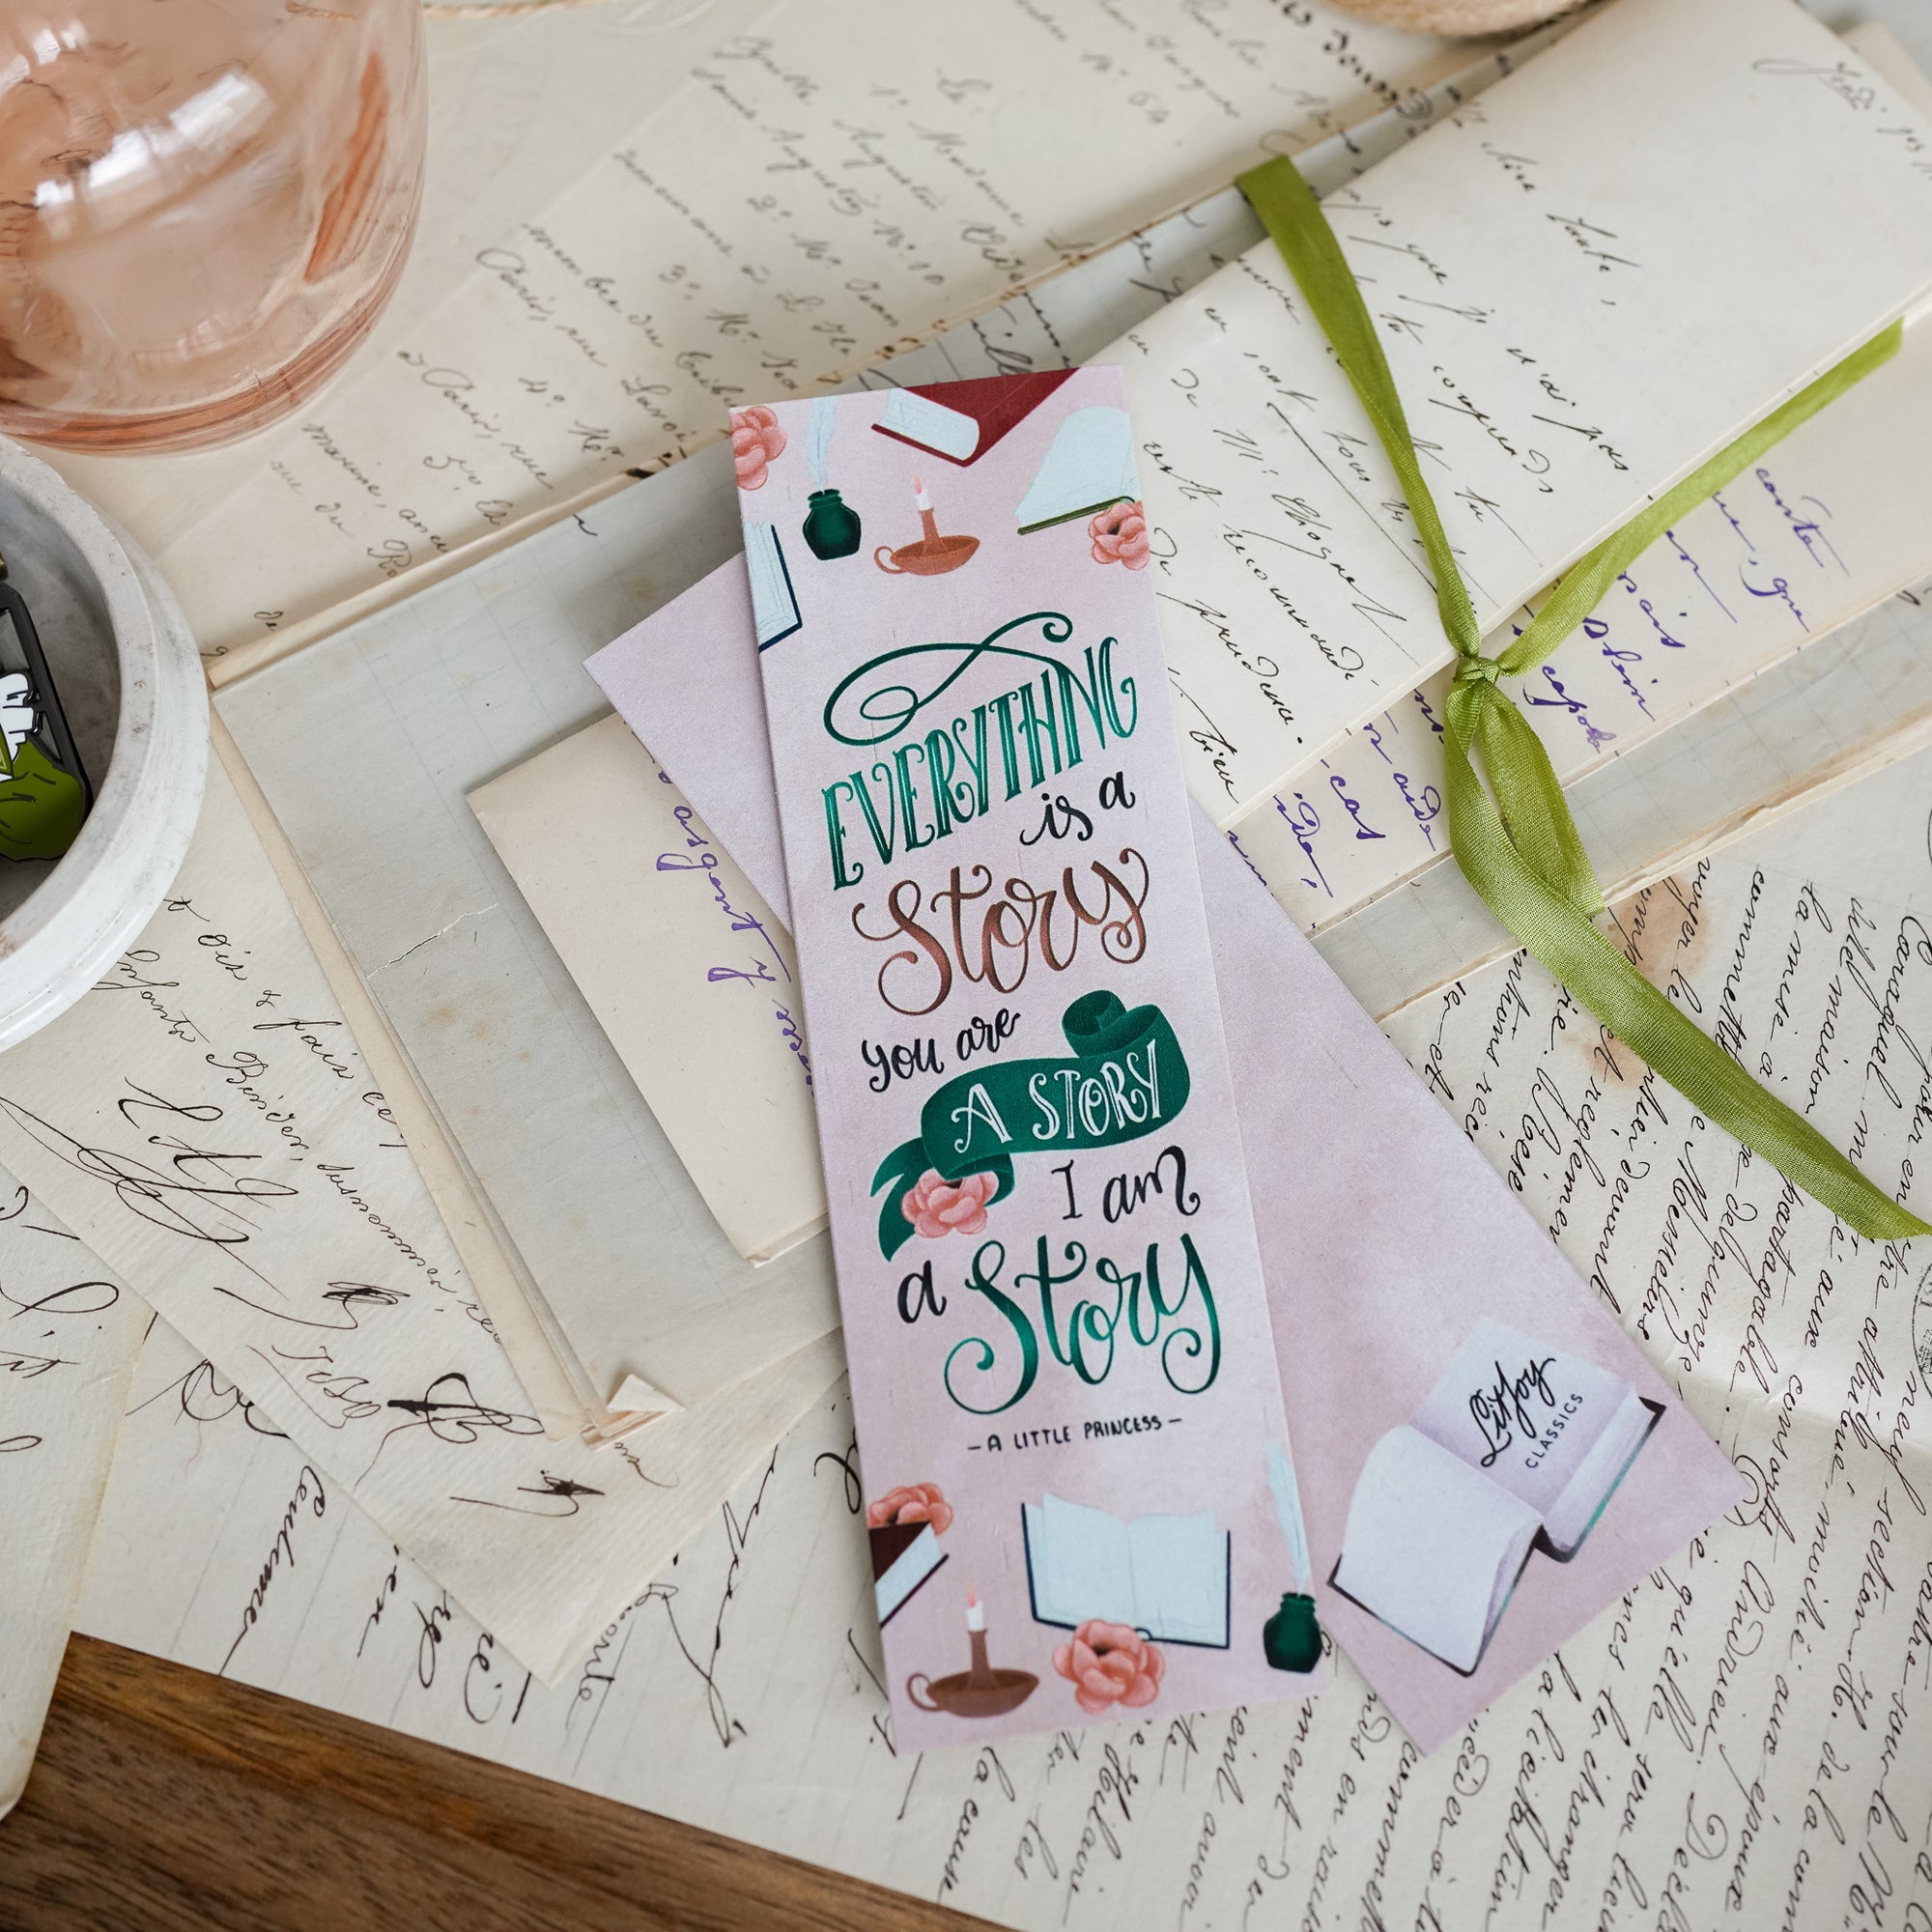 A Little Princess Wooden Bookmark with a quote and storybook images.